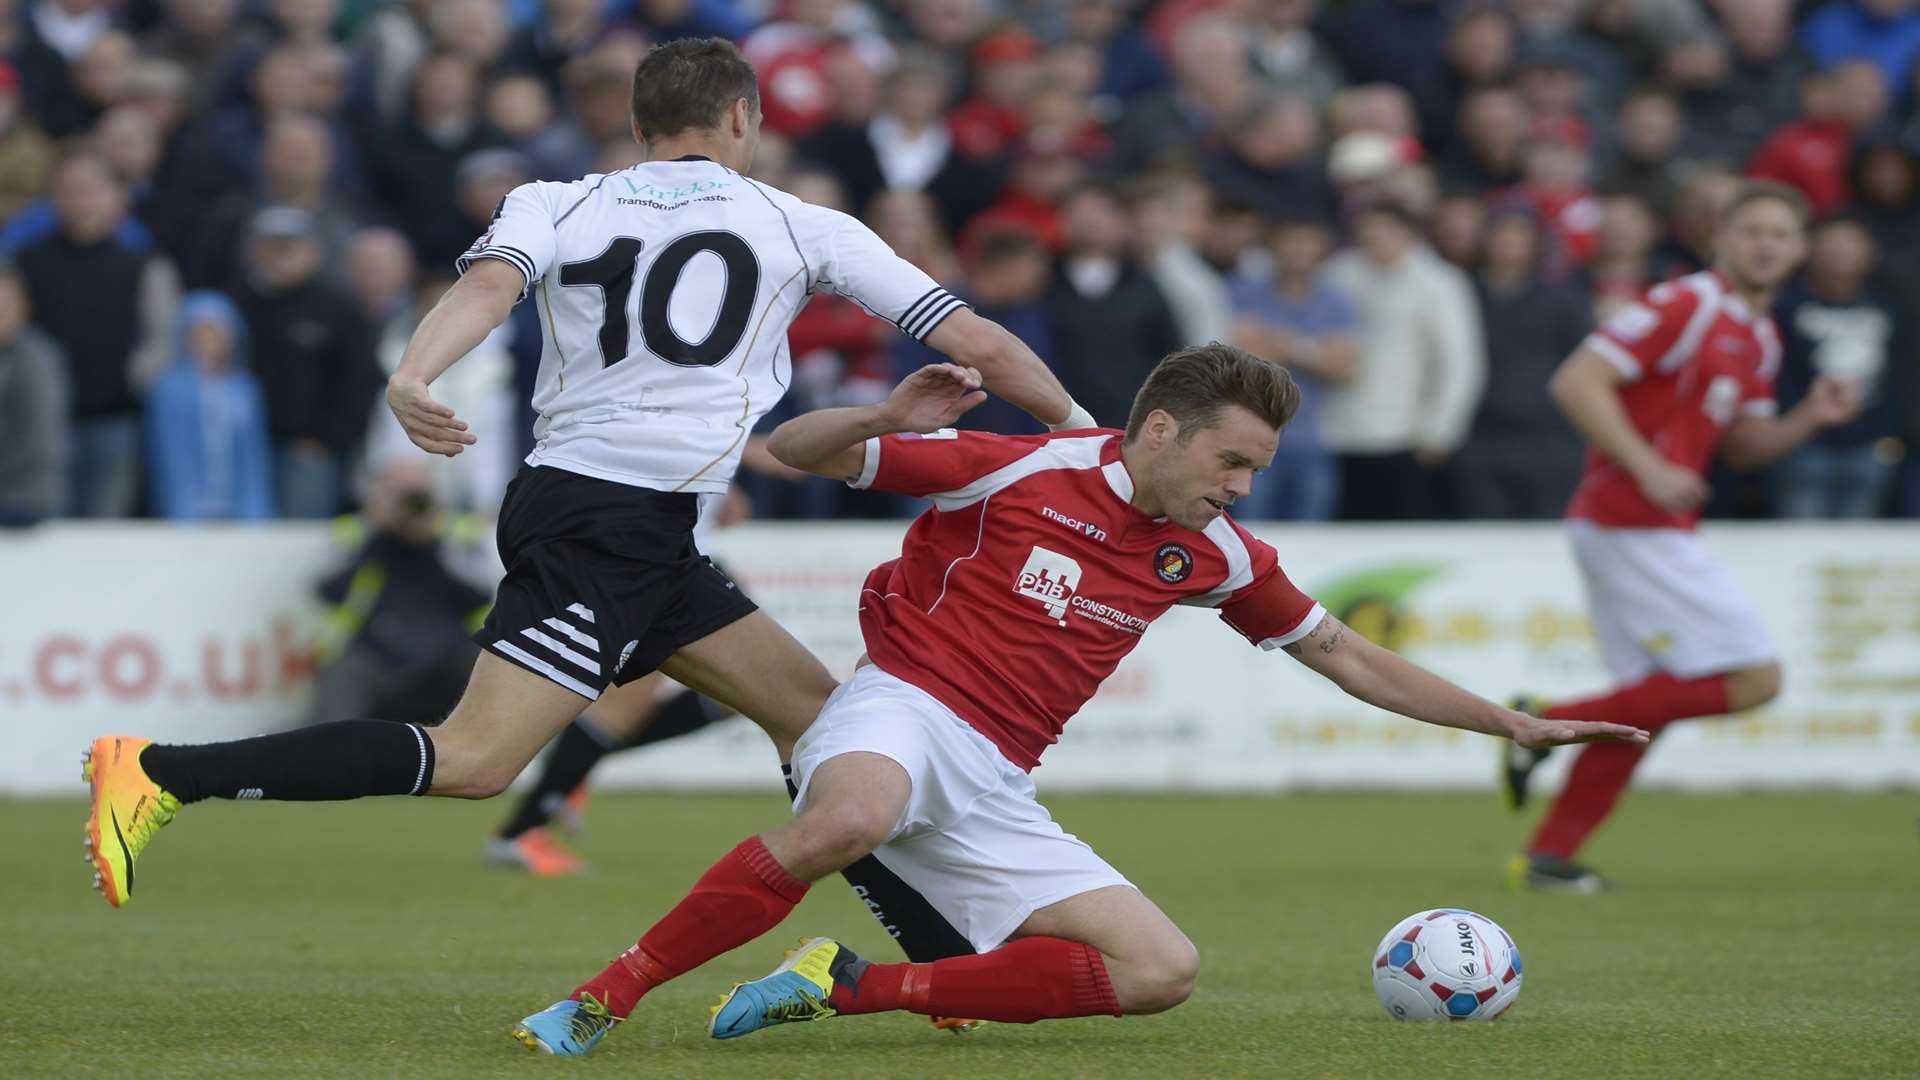 Daryl McMahon playing for Ebbsfleet against Dover in the 2014 Conference South play-off final Picture: Andy Payton